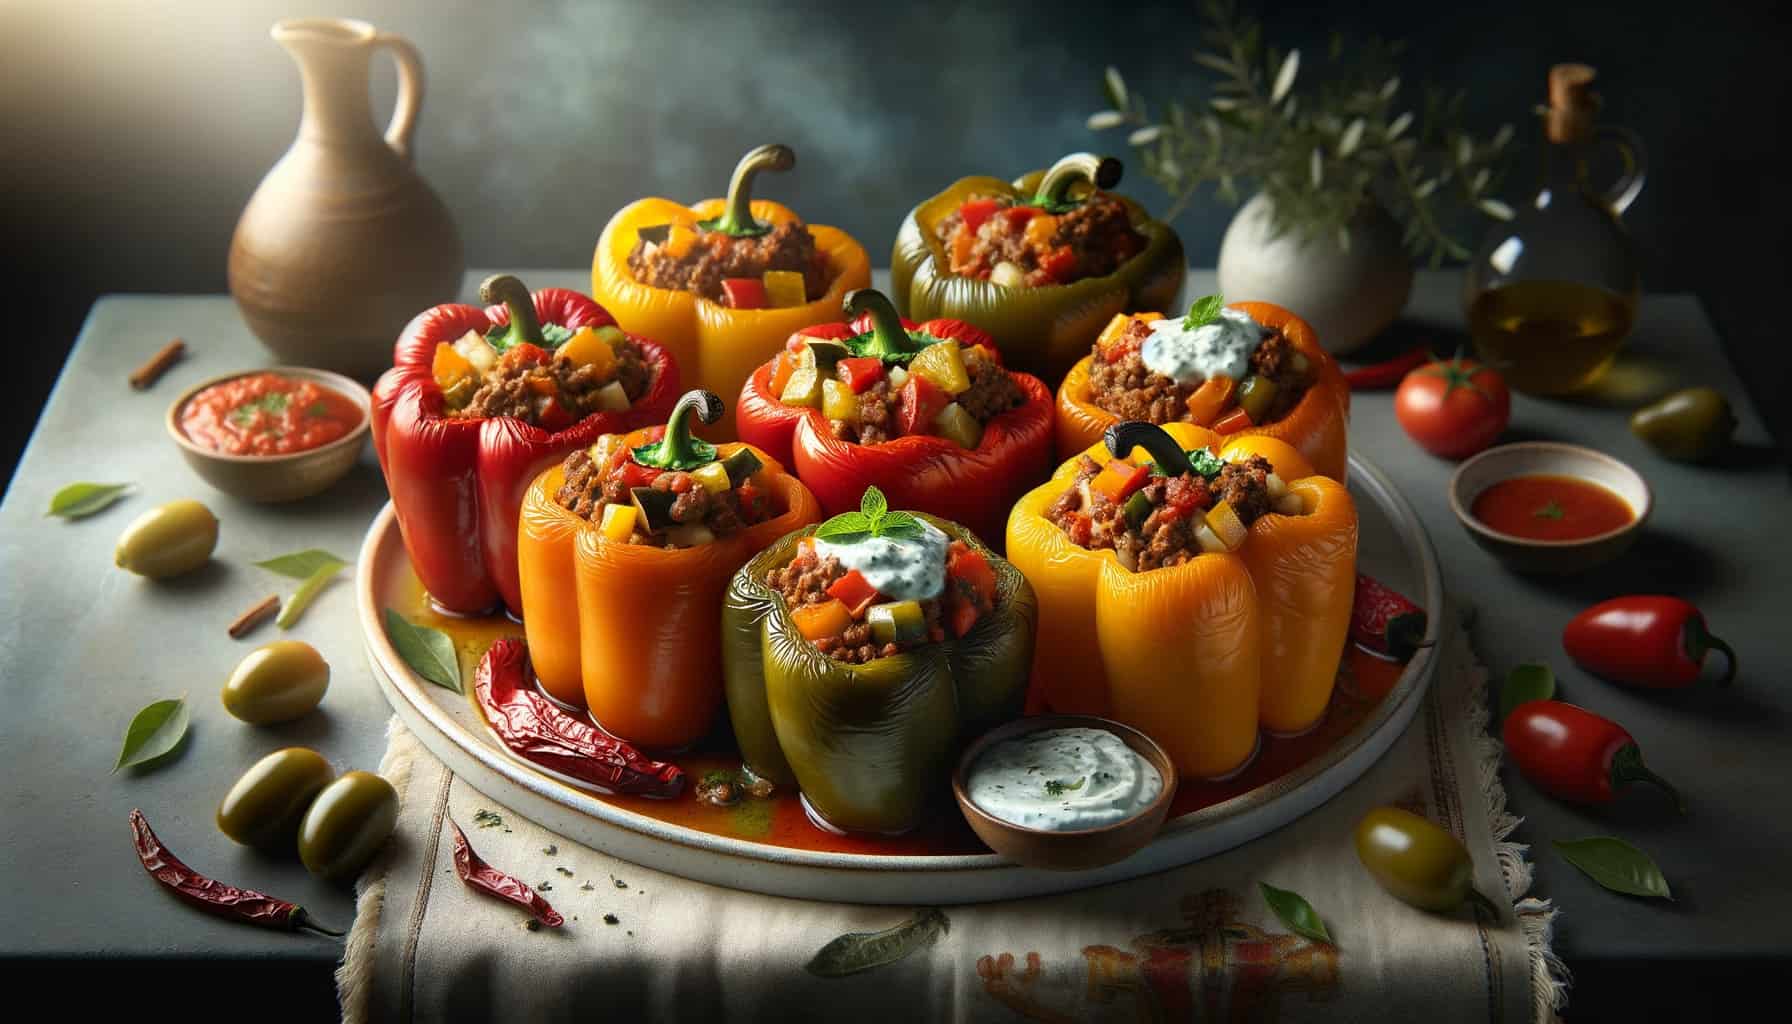 Mediterranean stuffed bell peppers arranged on a white ceramic plate. The bell peppers, with shades of orange, red, and yellow, are filled to the brim with a savory mix of ground lamb, rice, diced zucchini, and seasoned with mediterranean spices. A dollop of tzatziki sauce and a sprinkle of chopped mint leaves enhance the flavors.